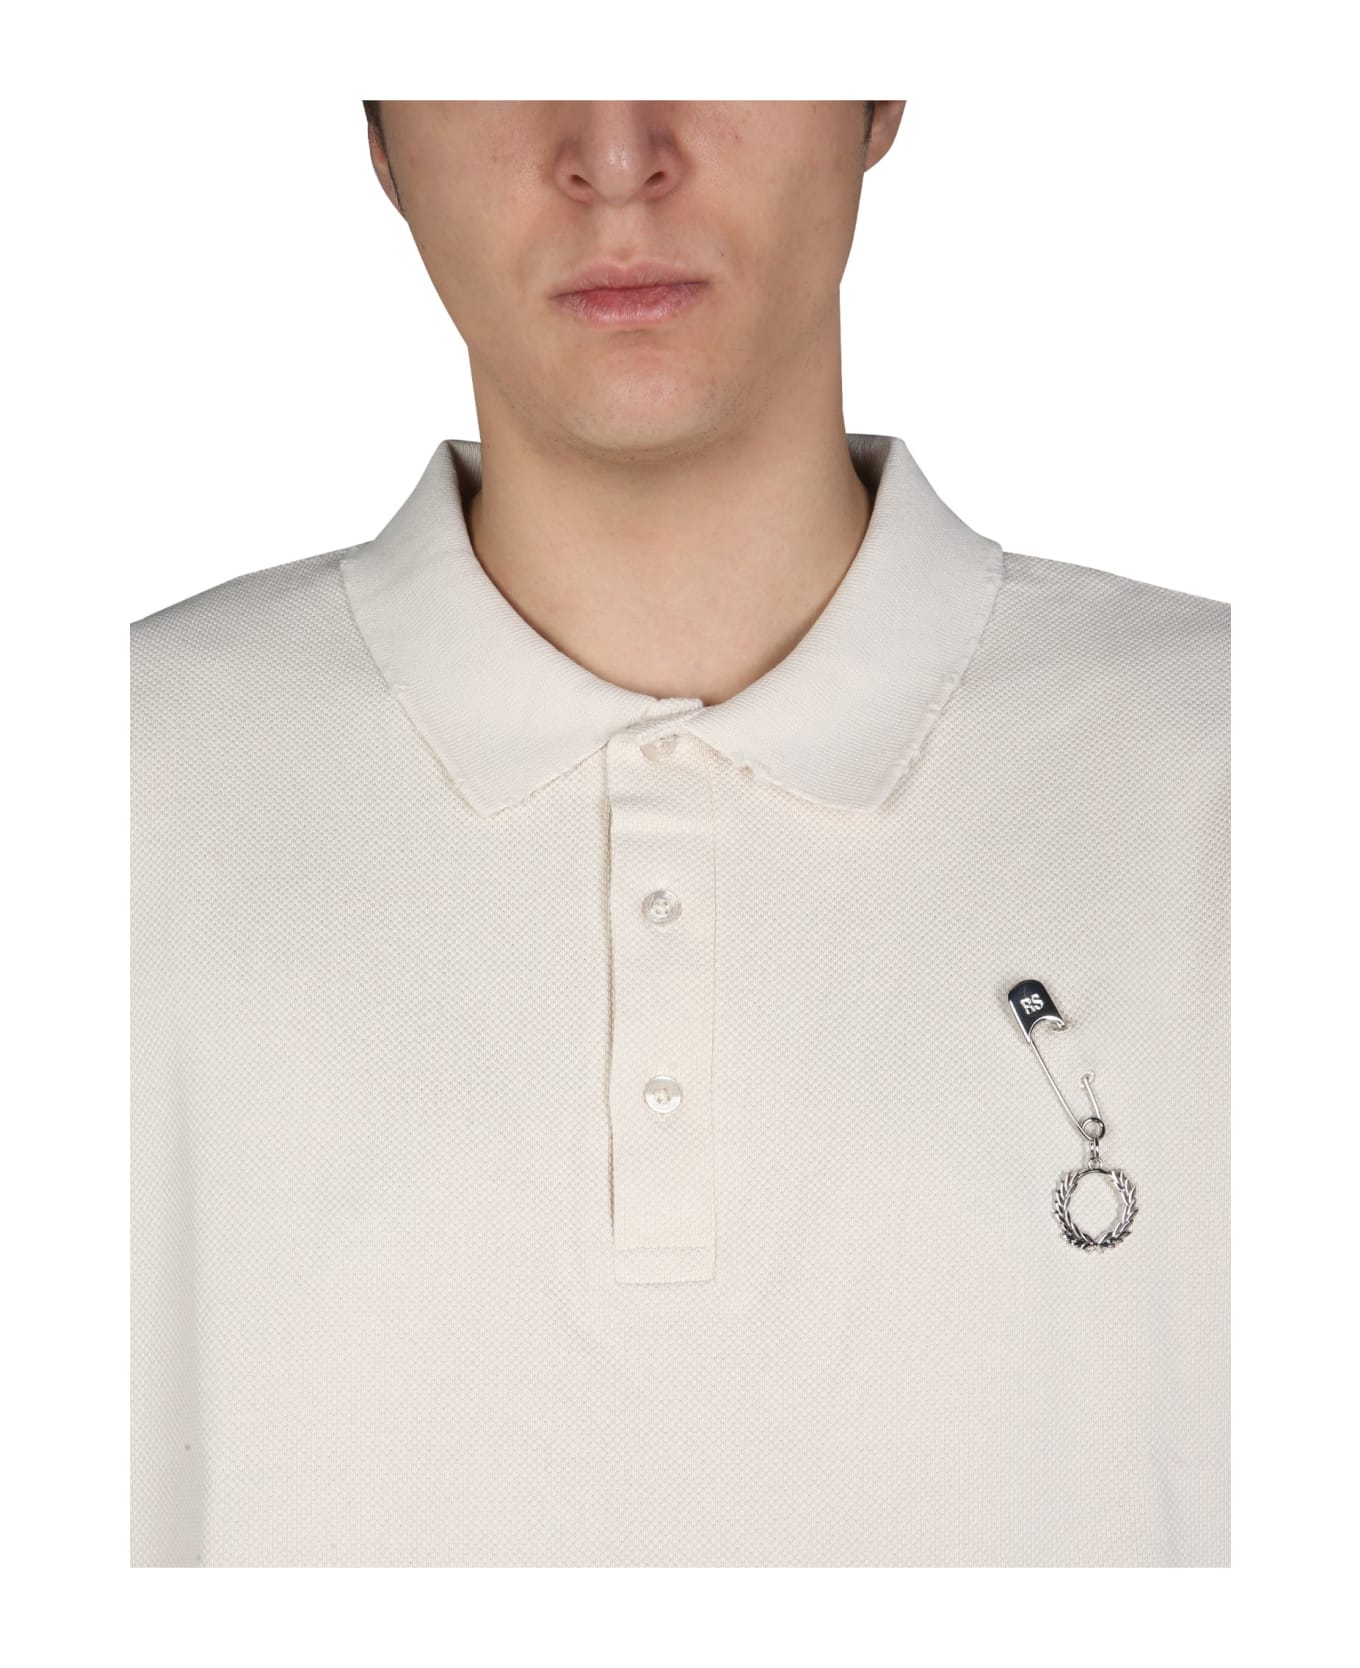 Fred Perry by Raf Simons Distressed Oversized Polo Shirt - CIPRIA